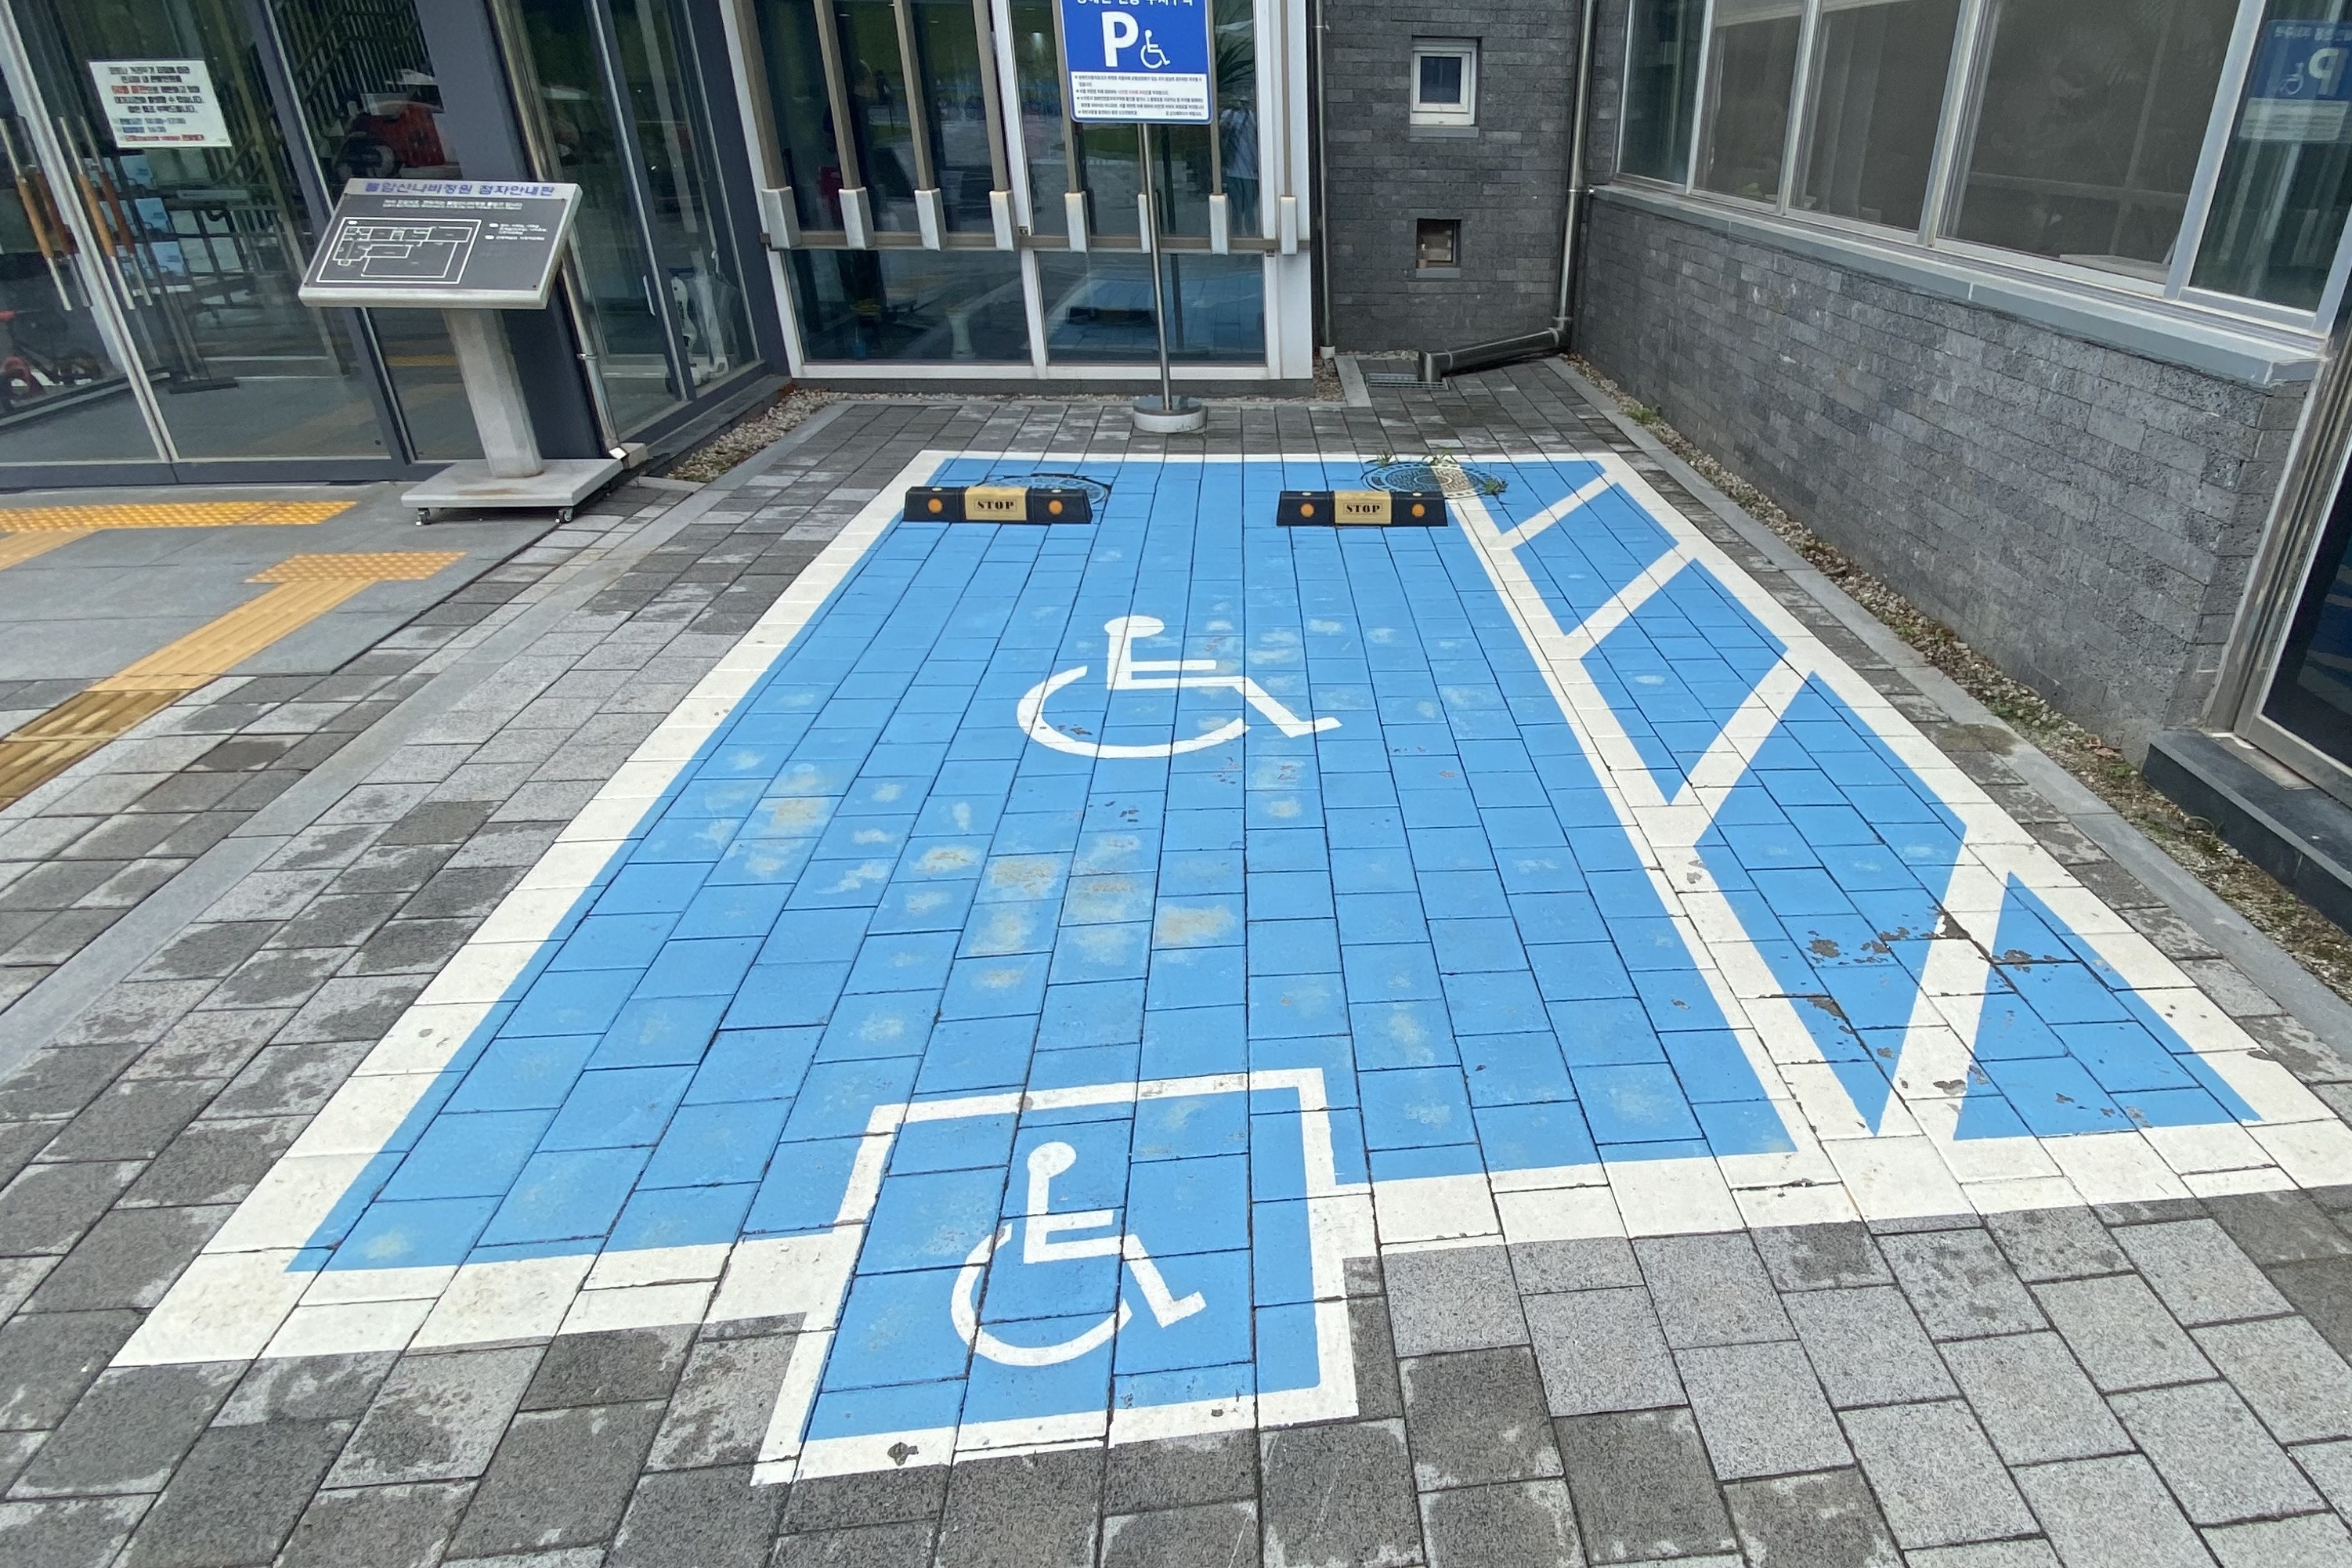 Accessible parking lots0 : Interior view of the Accessible parking lots in Buramsan Butterfly Garden which is spacious to use